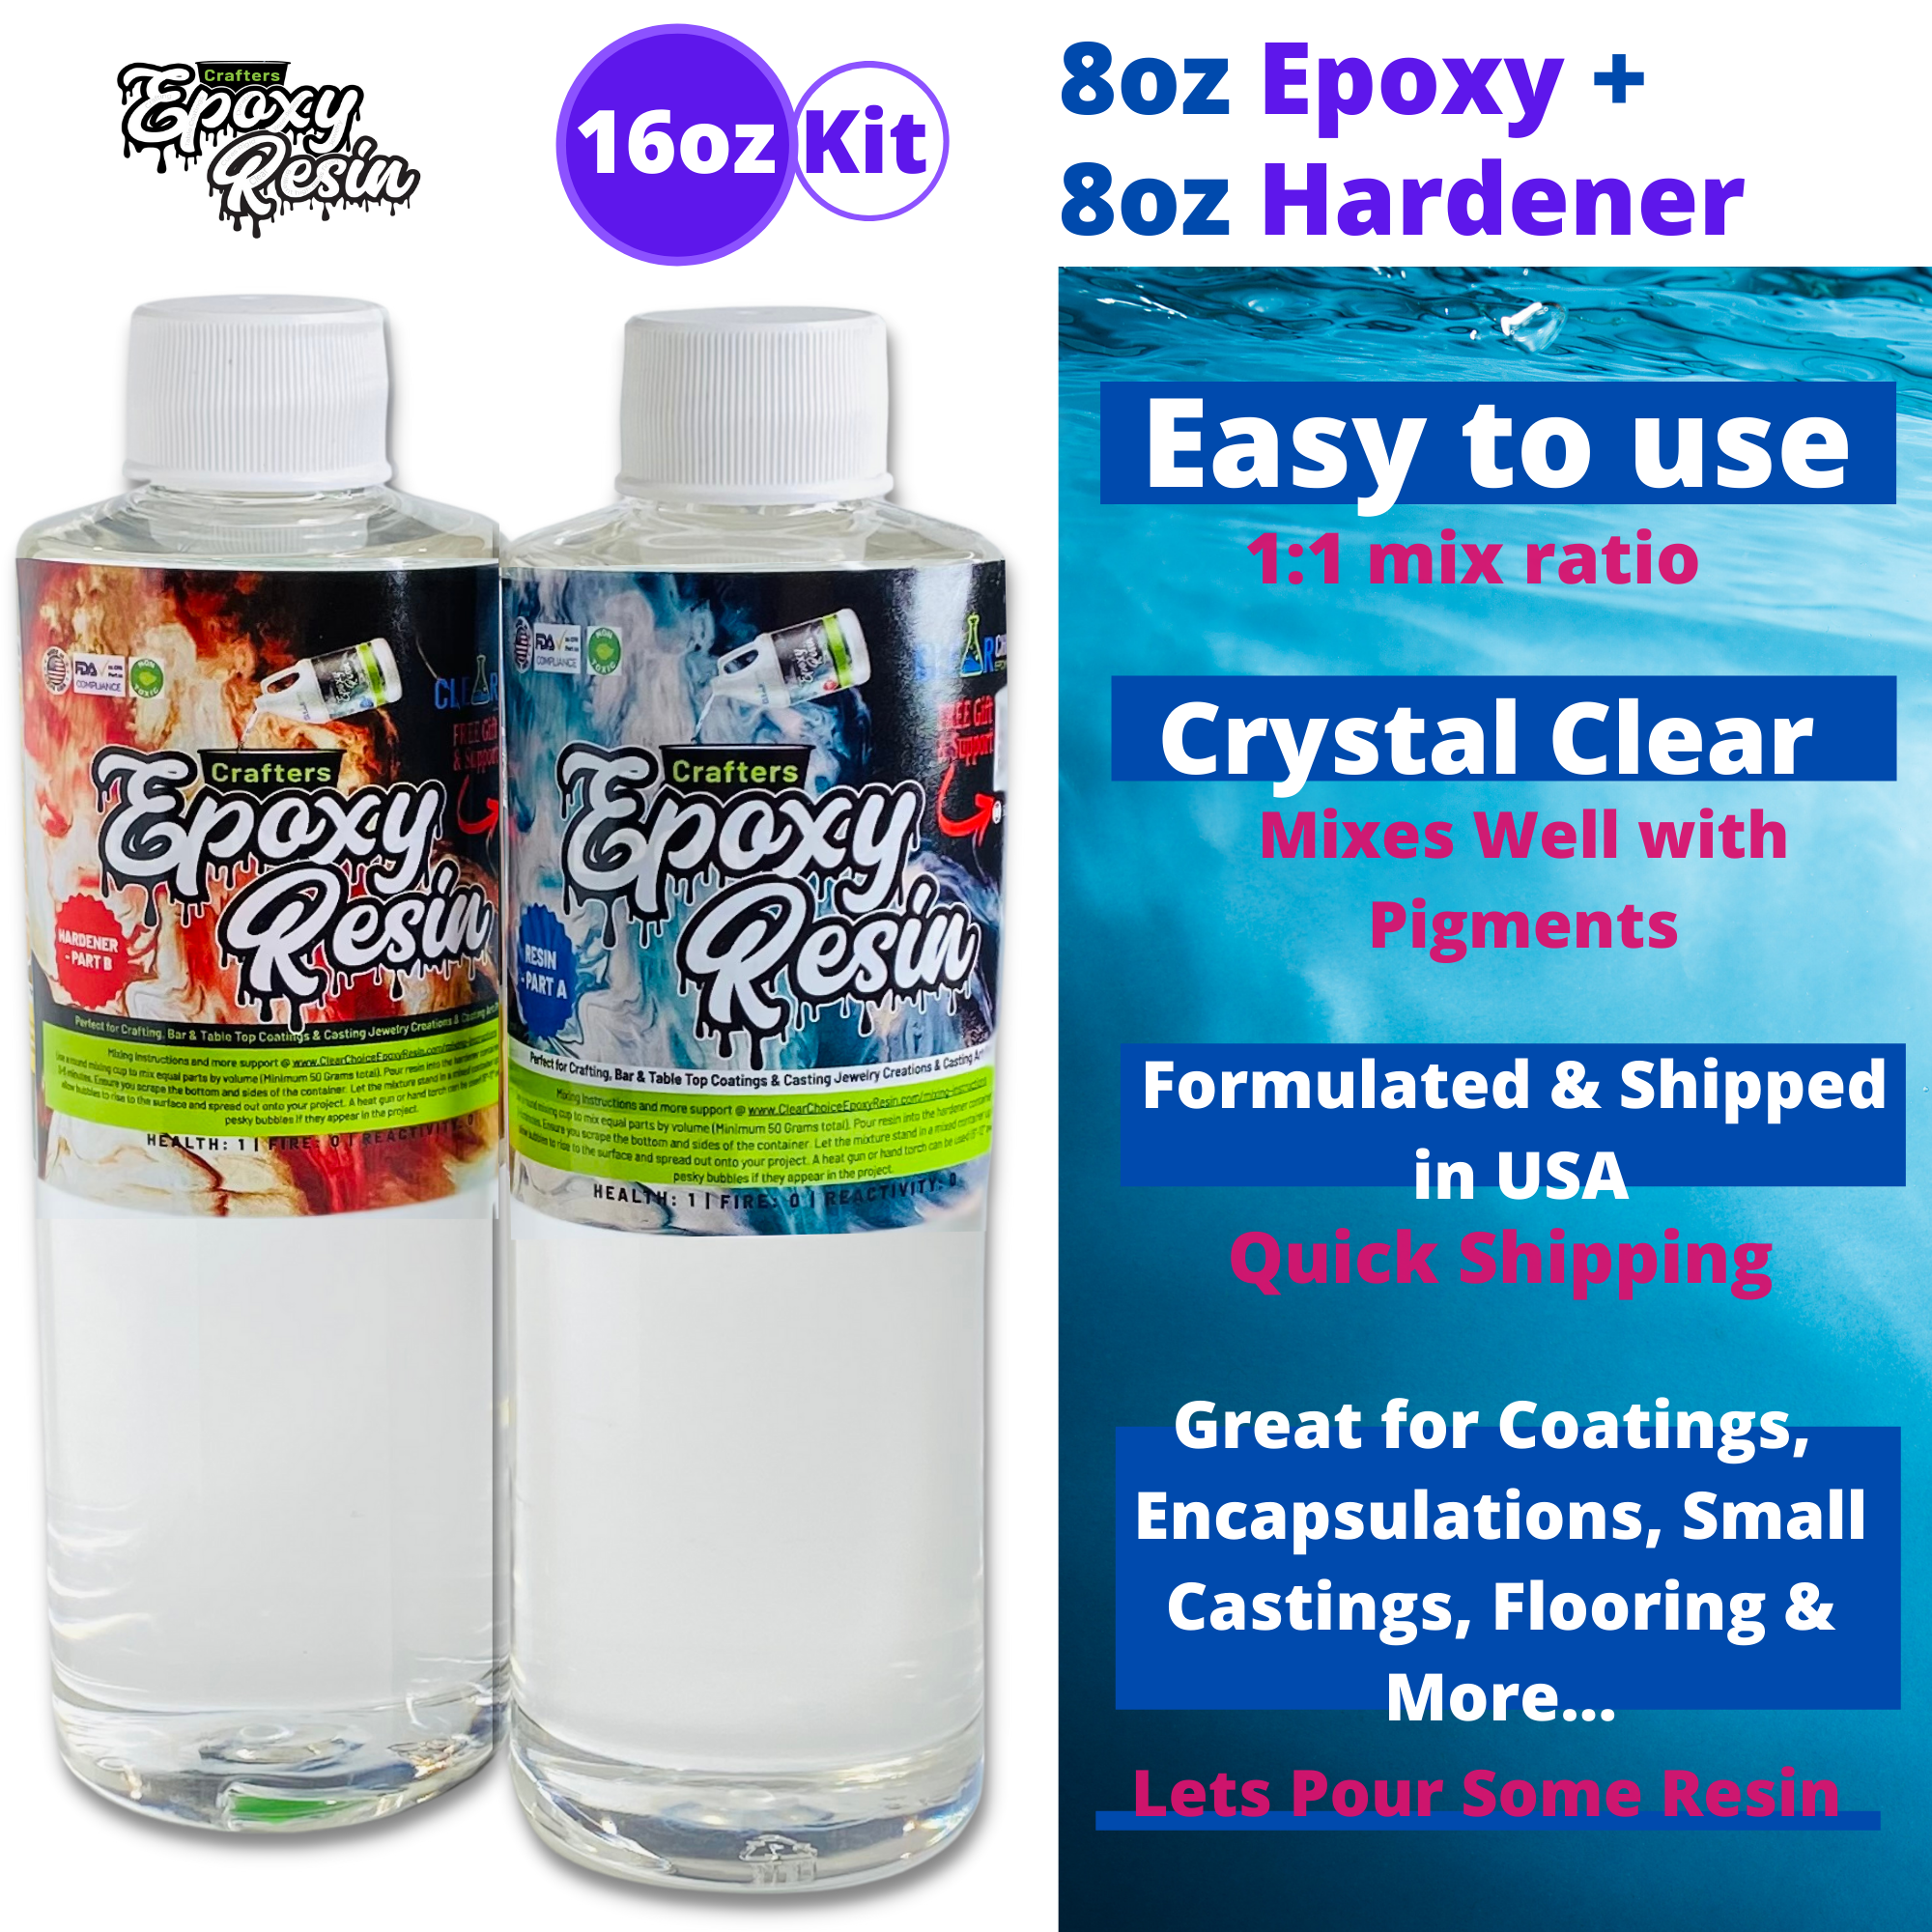 Super Clear Epoxy Resin Table Top Coating 2 Gallons Kit - China Epoxy,  Resin